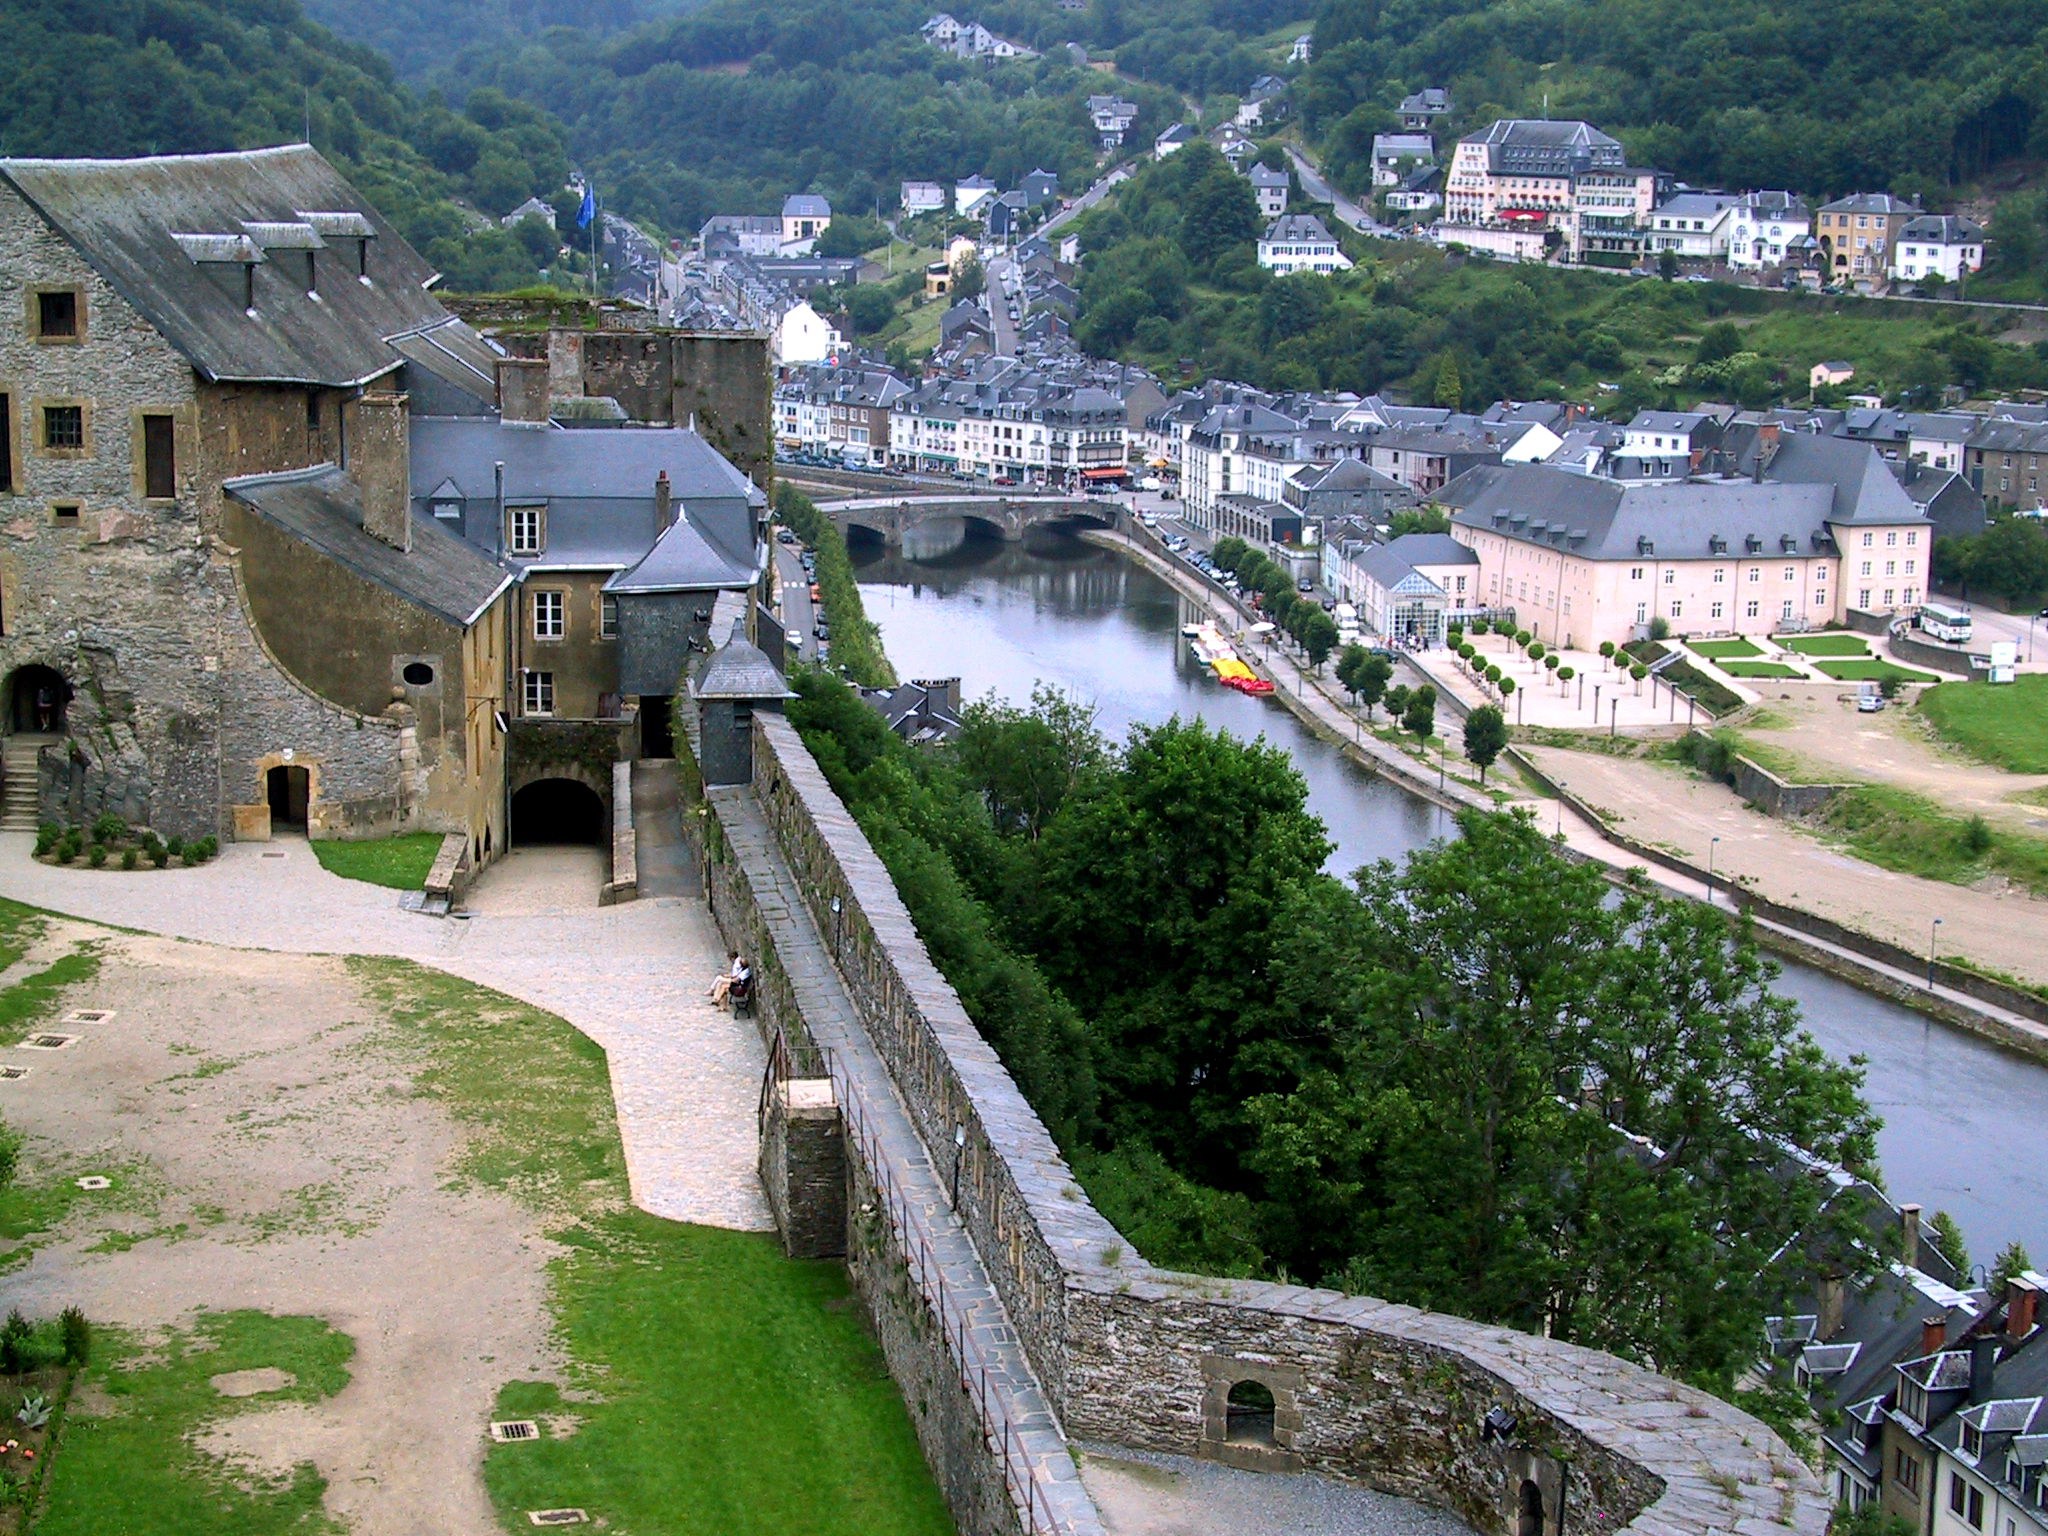 Panoranic view of the town of Bouillon from the Castle